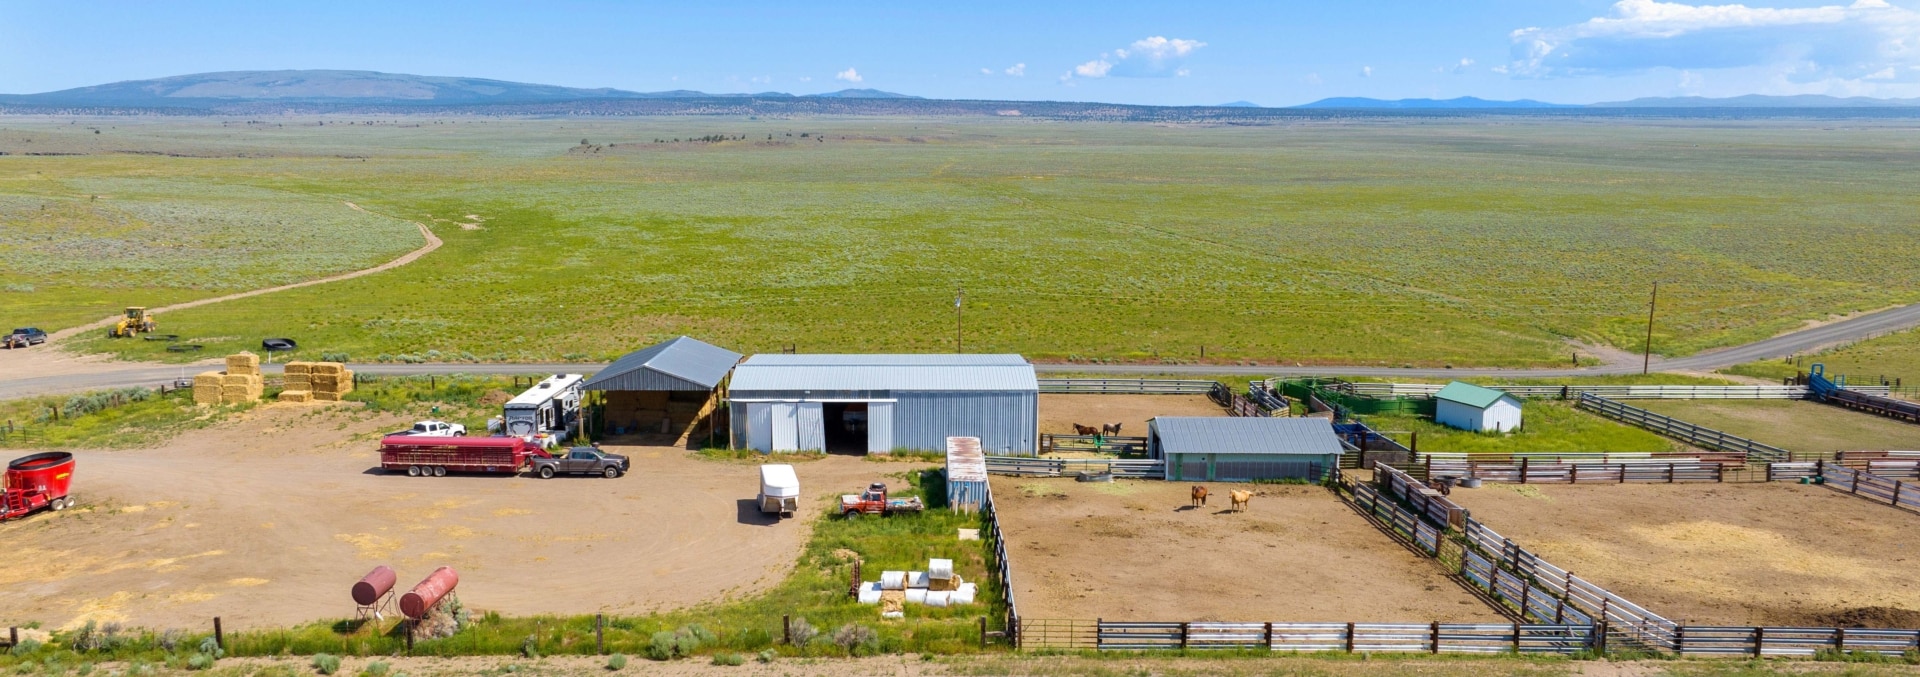 oregon ranches for sale the new moffitt ranch